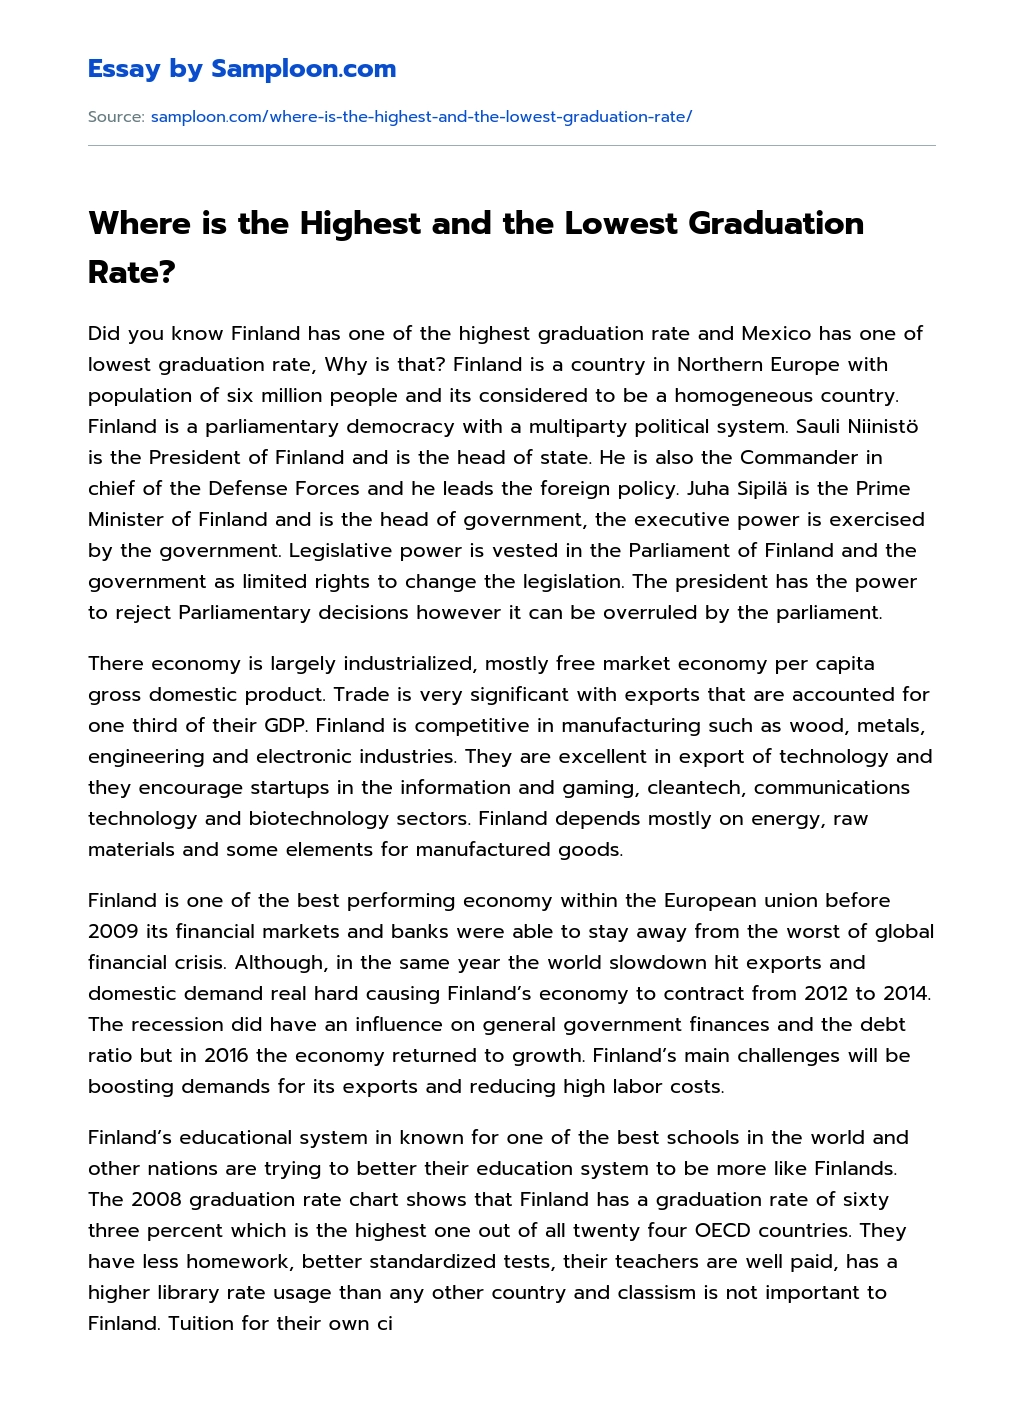 Where is the Highest and the Lowest Graduation Rate? essay